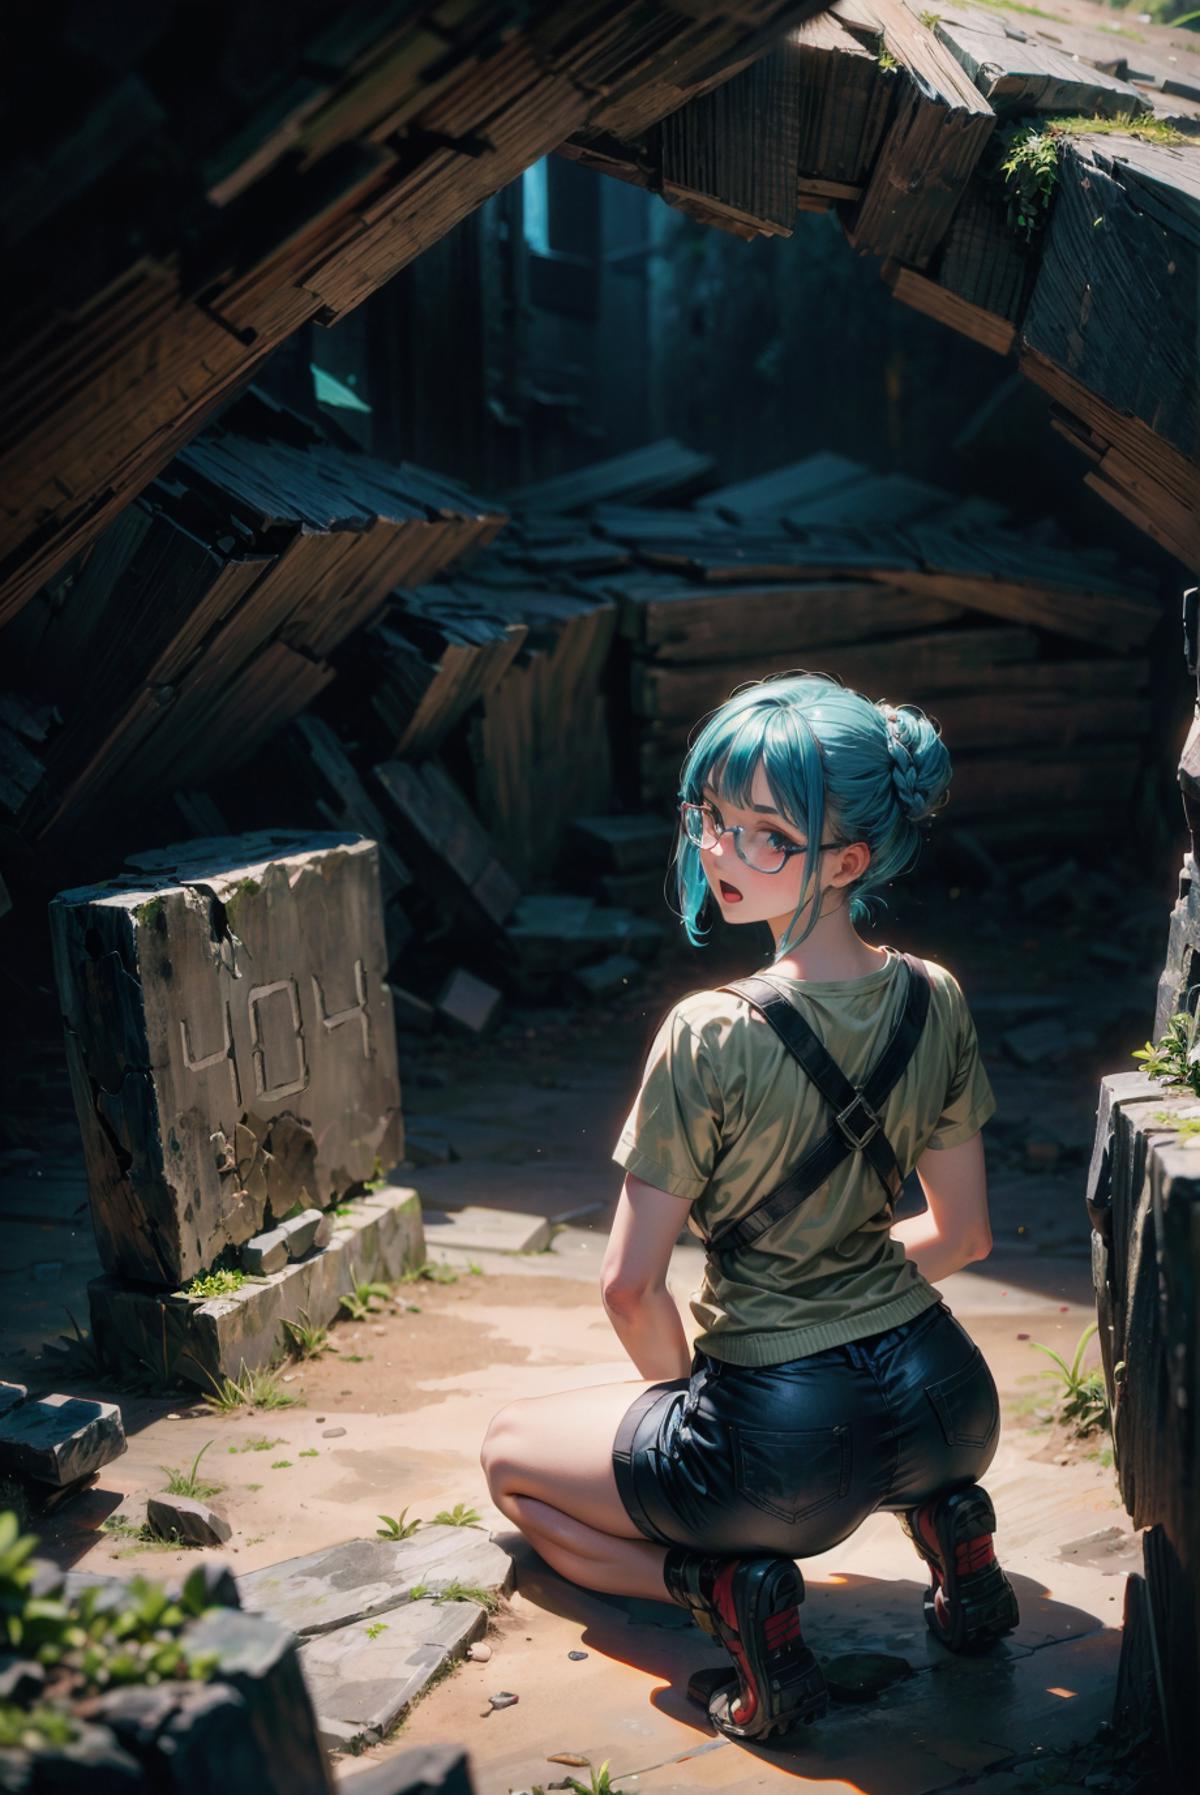 Blue-haired girl posing in a ruined setting with a backpack and glasses.